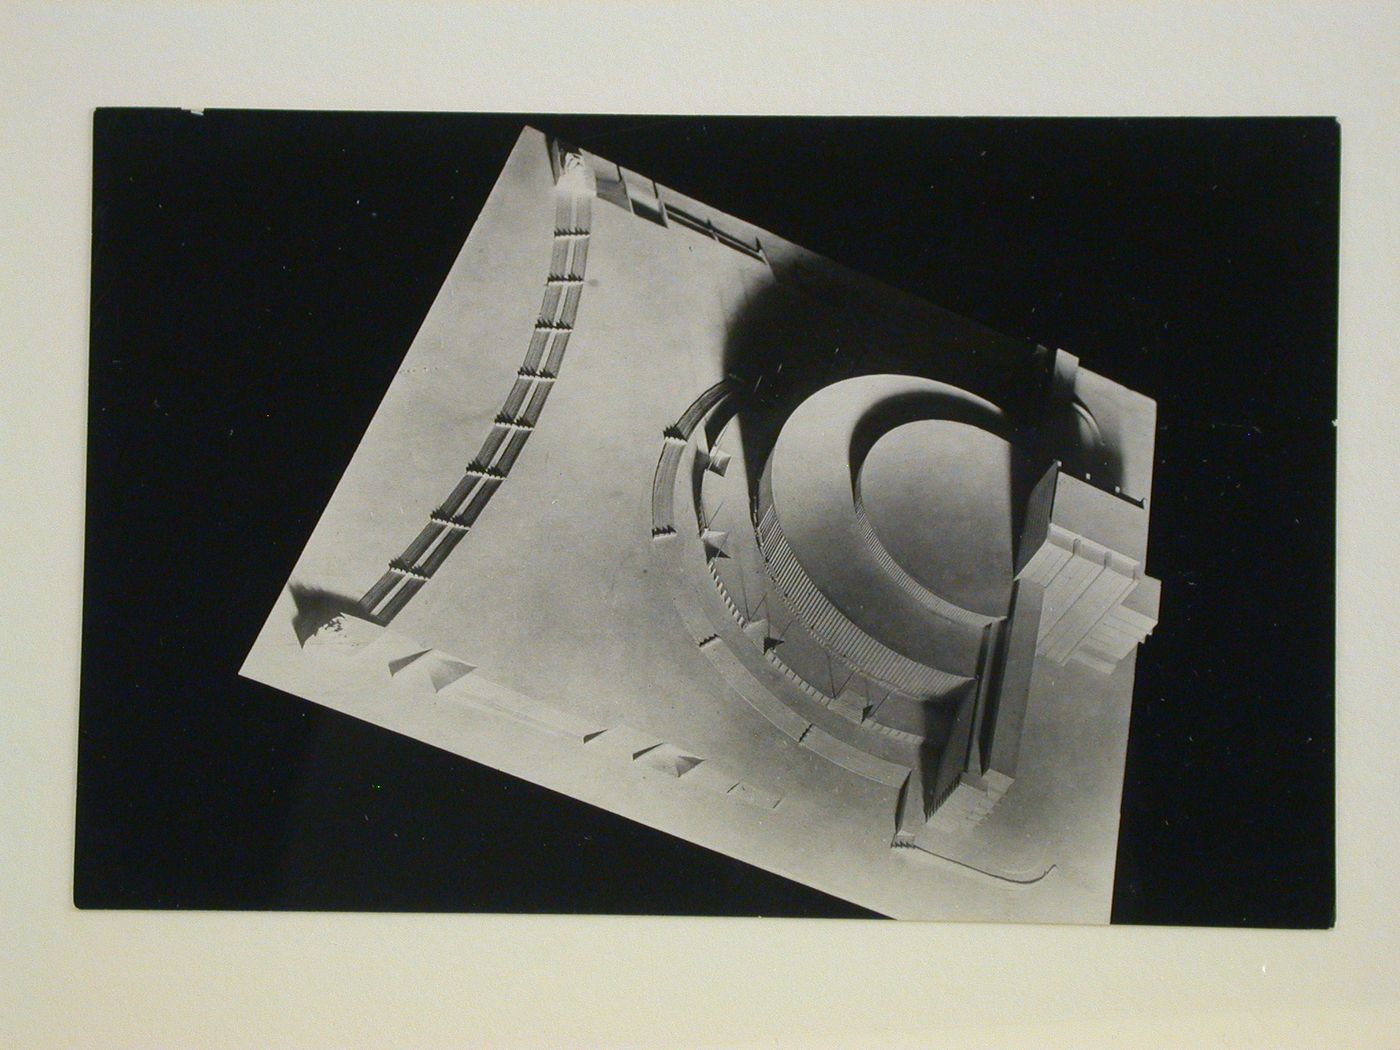 Photograph of a model for the final round of competition for a "synthetic theater" in Sverdlovsk, Soviet Union (now Ekaterinburg, Russia)